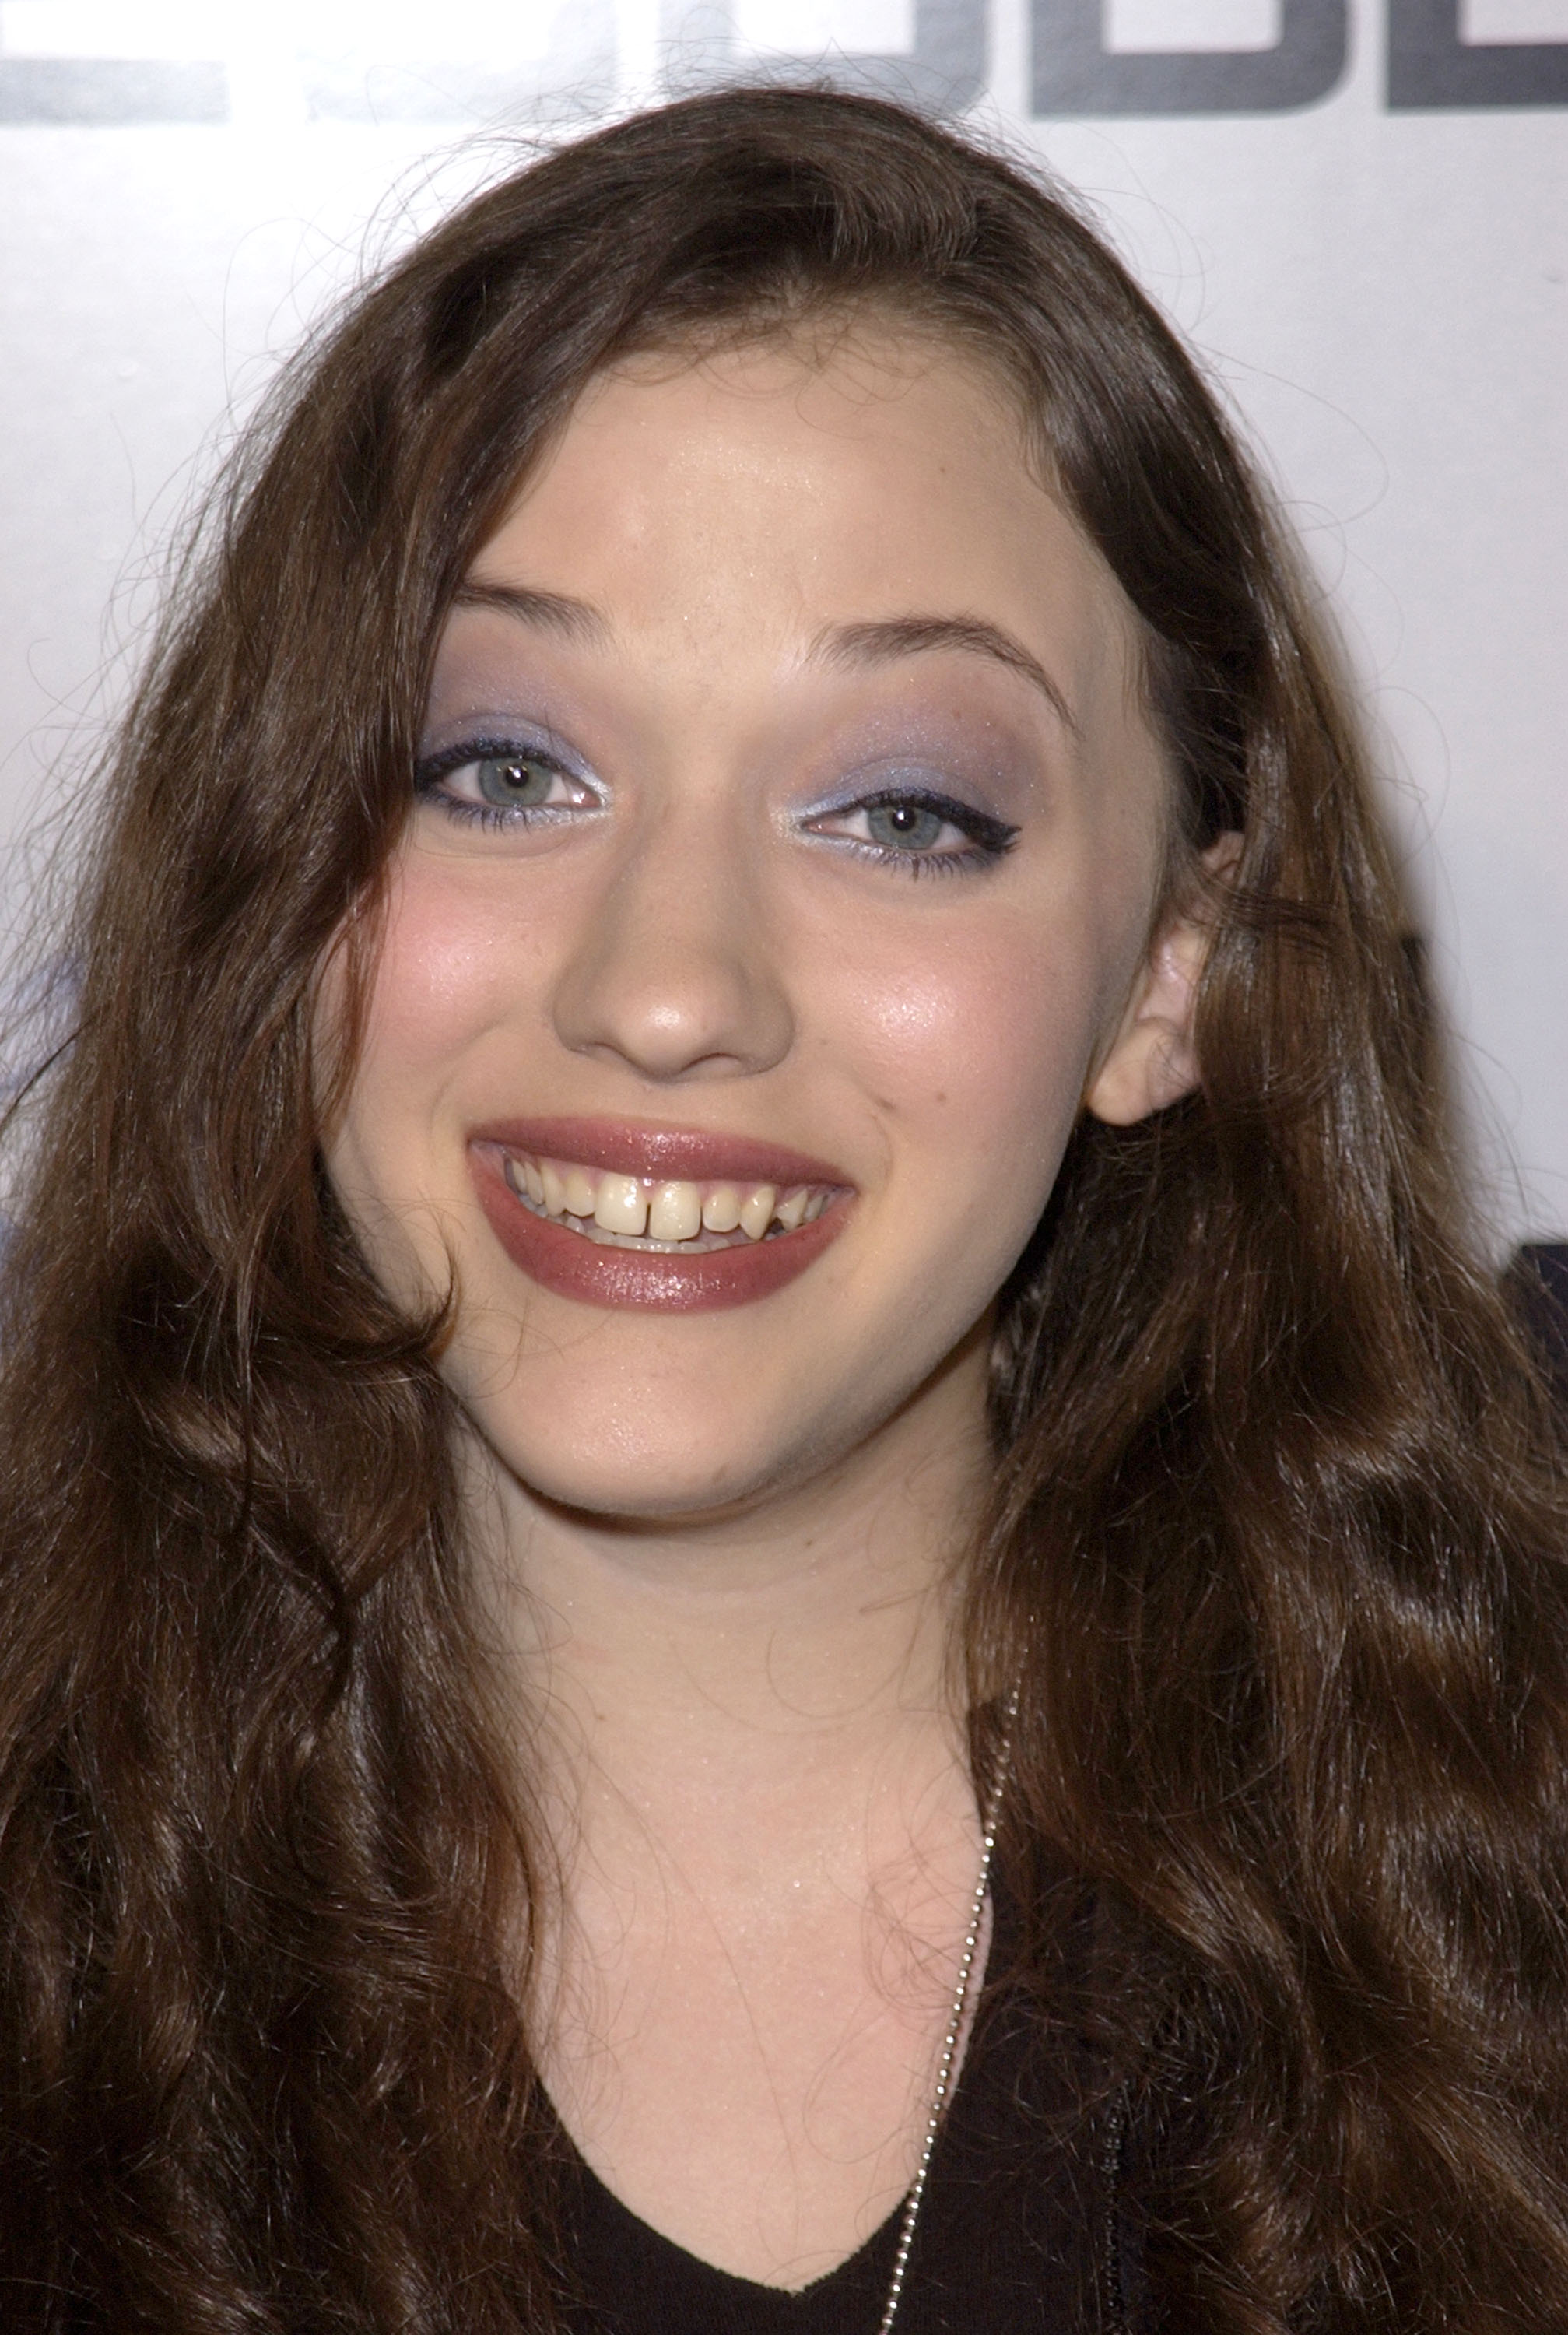 Kat Dennings during the Nintendo Game Cube Premiere Party in 2001